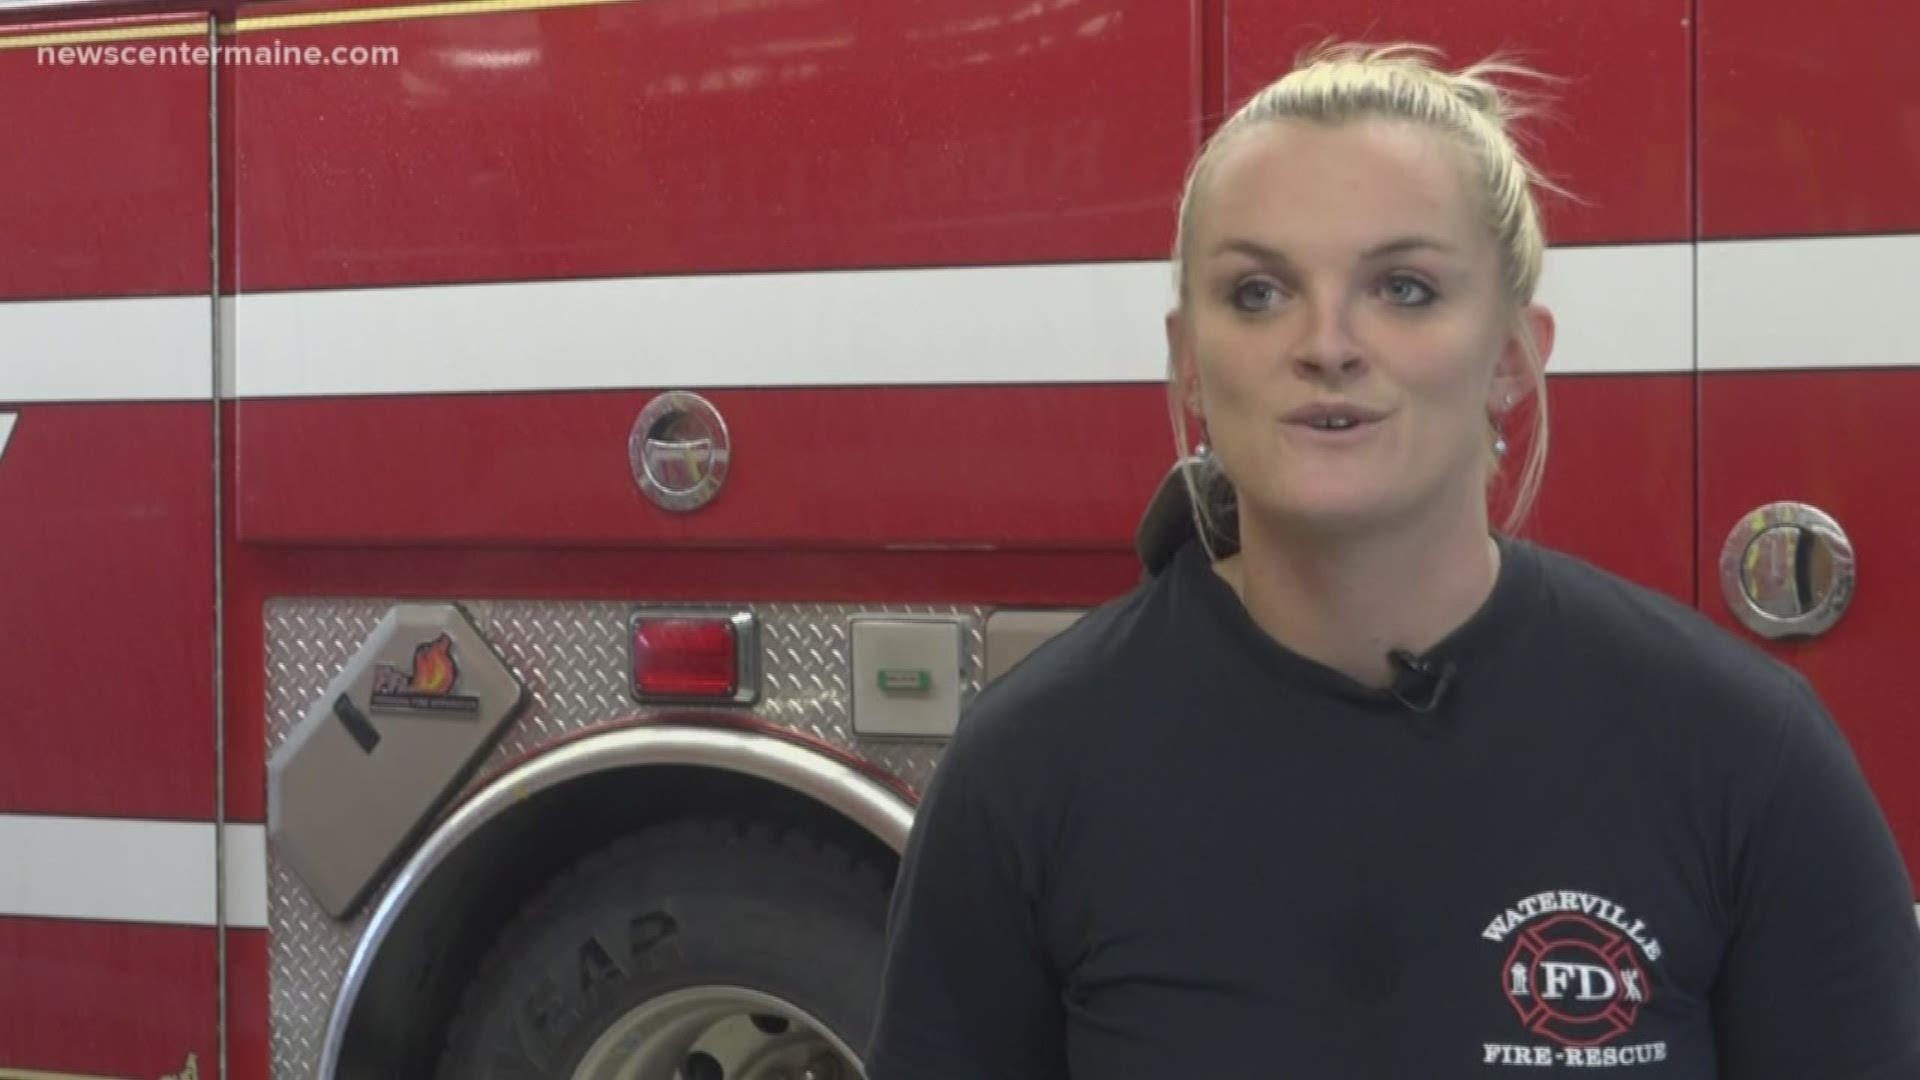 Fighting stigmas, and fighting fires. Waterville's newest firefighter is doing both